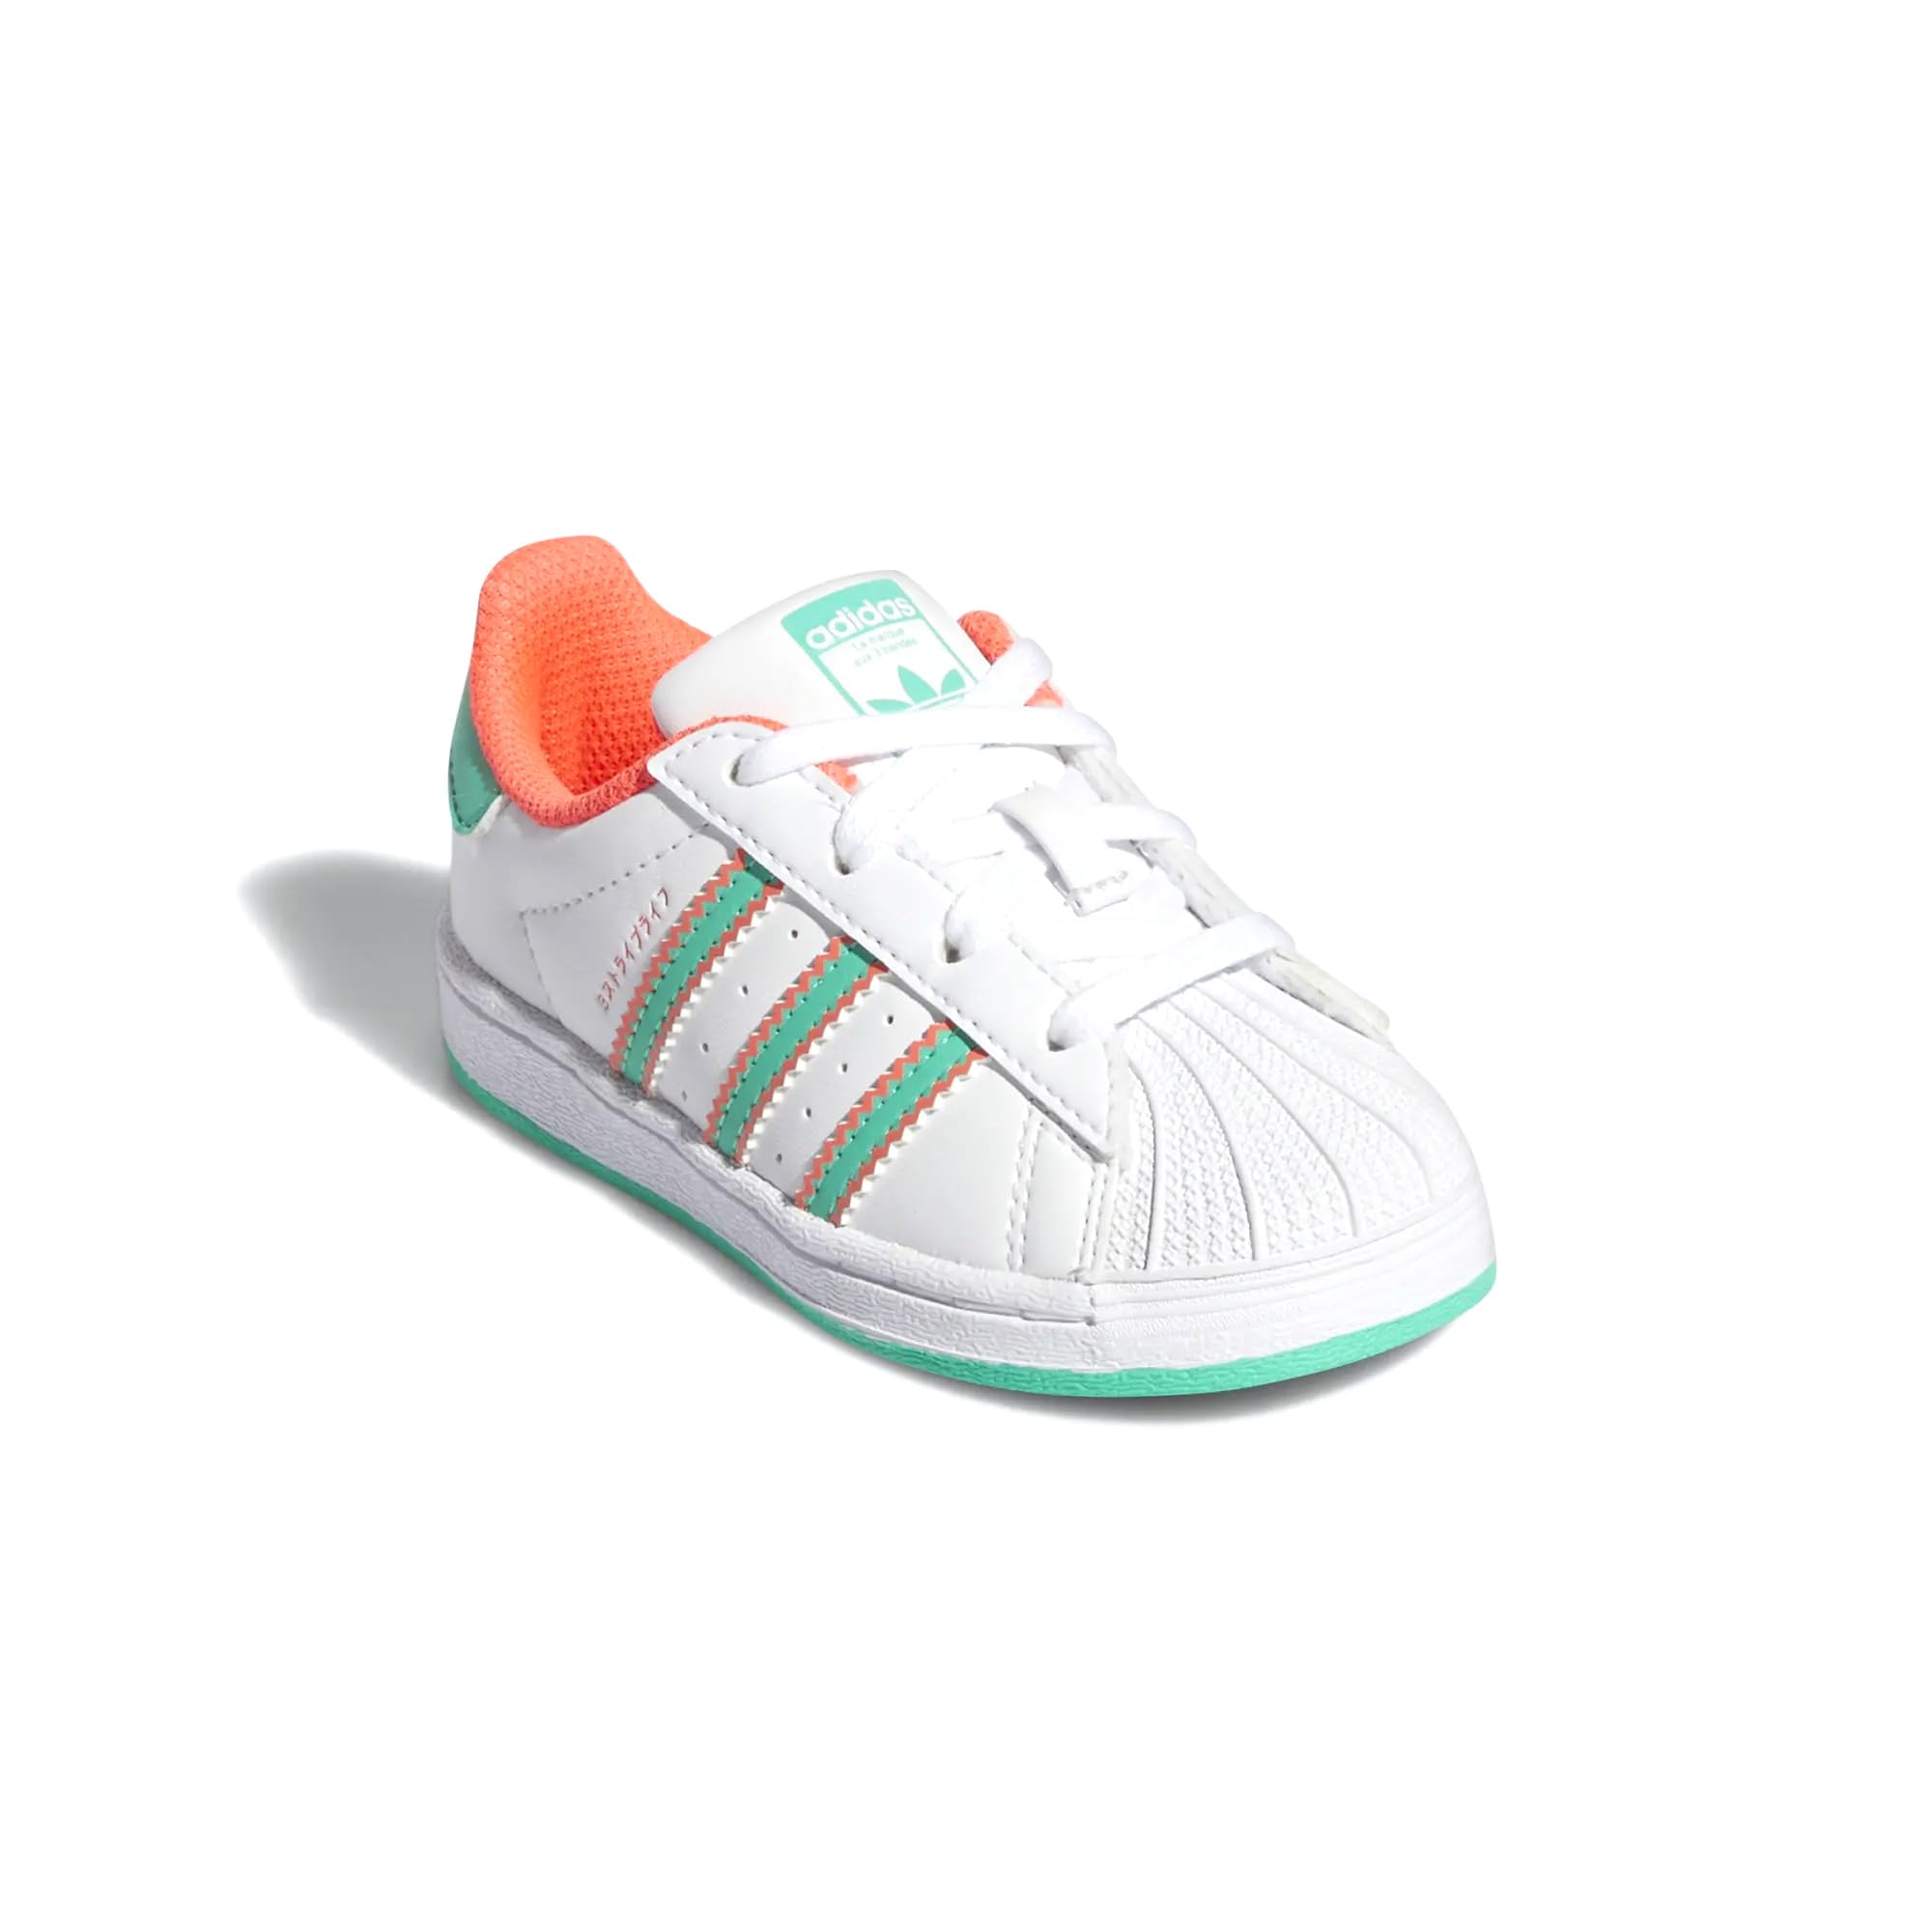 adidas Infants Superstar Low Sneakers, Cloud White/Hi-Res Green/Turbo